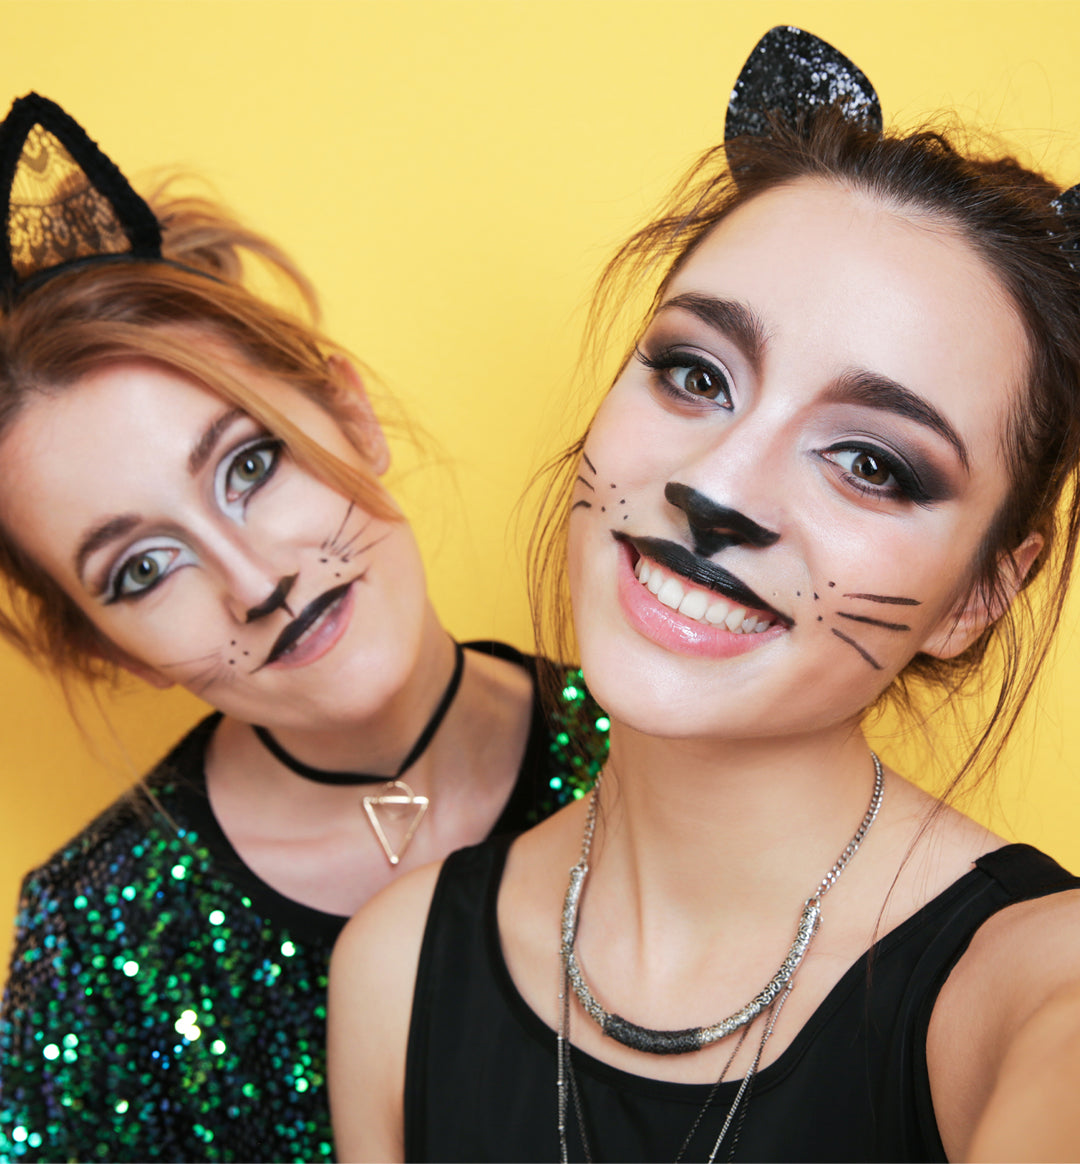 How to Apply (and Remove) Halloween Face Paint Like a Pro